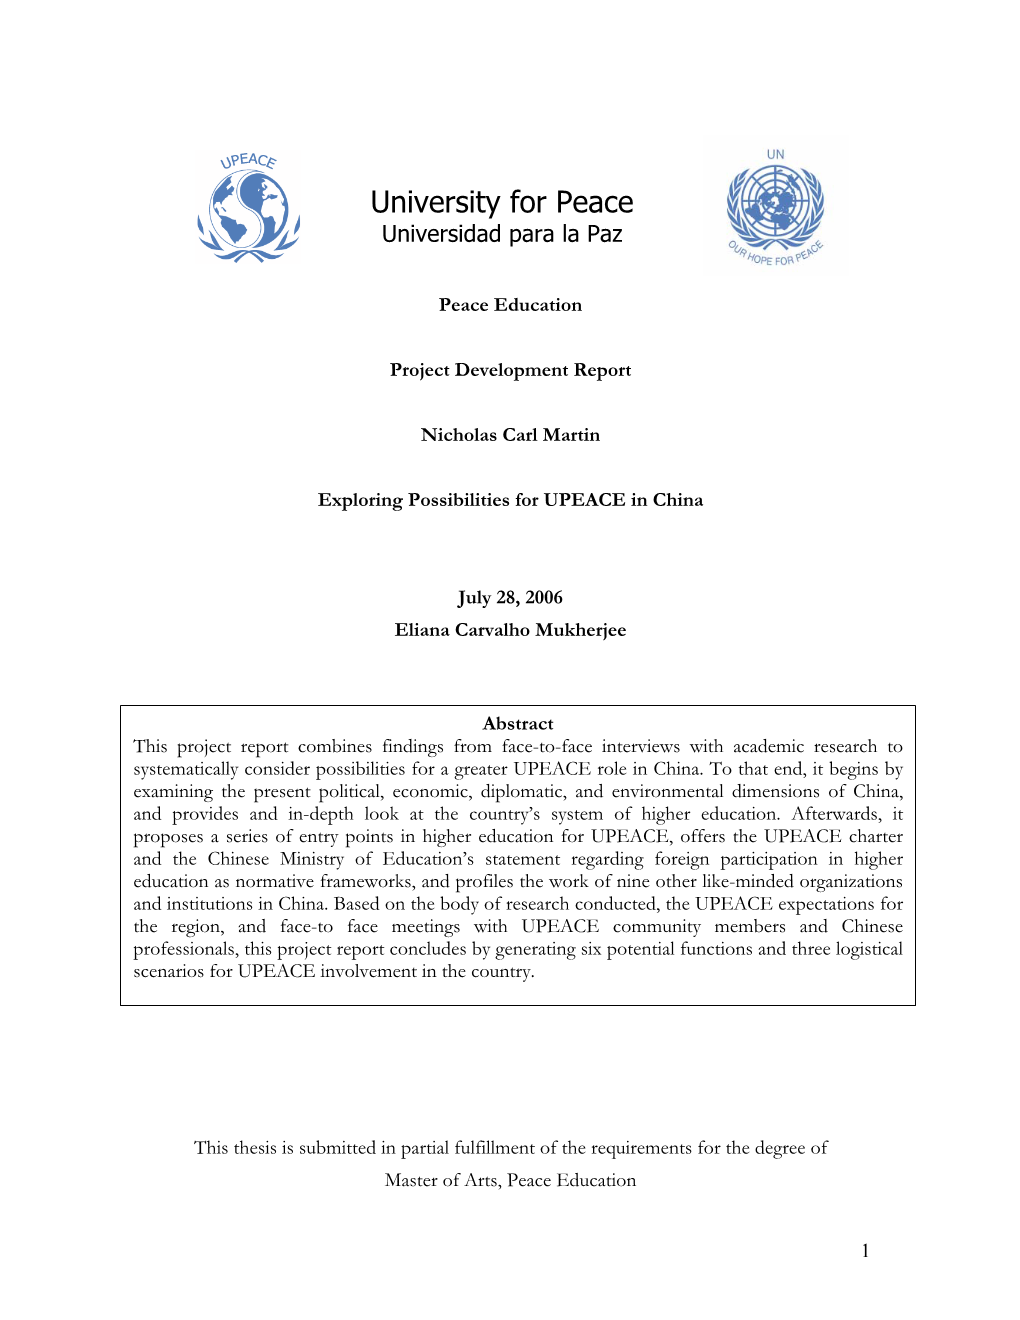 Exploring Possibilities for UPEACE in China: Peace Education, Project Development Report